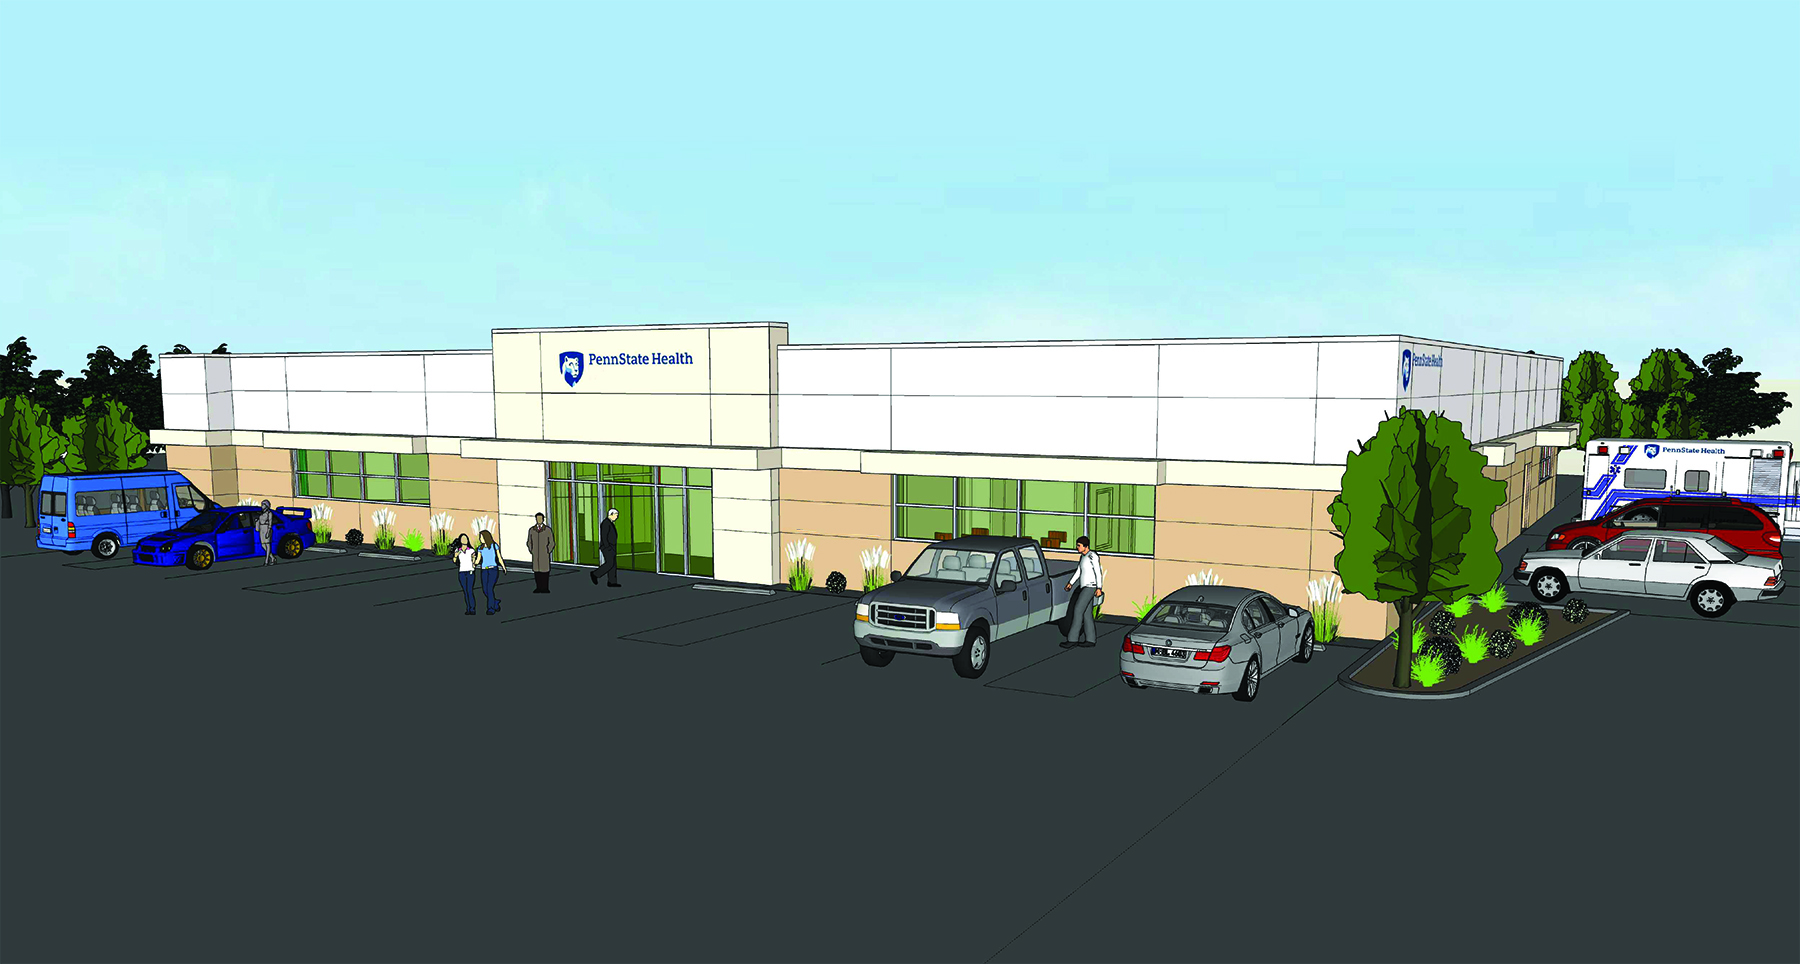 A rendering of the Penn State Health Muhlenberg Outpatient Center shows a one-story building with a sign of the Penn State Health logo over the entrance and cars parked around it. Six people are shown walking in and around the building.